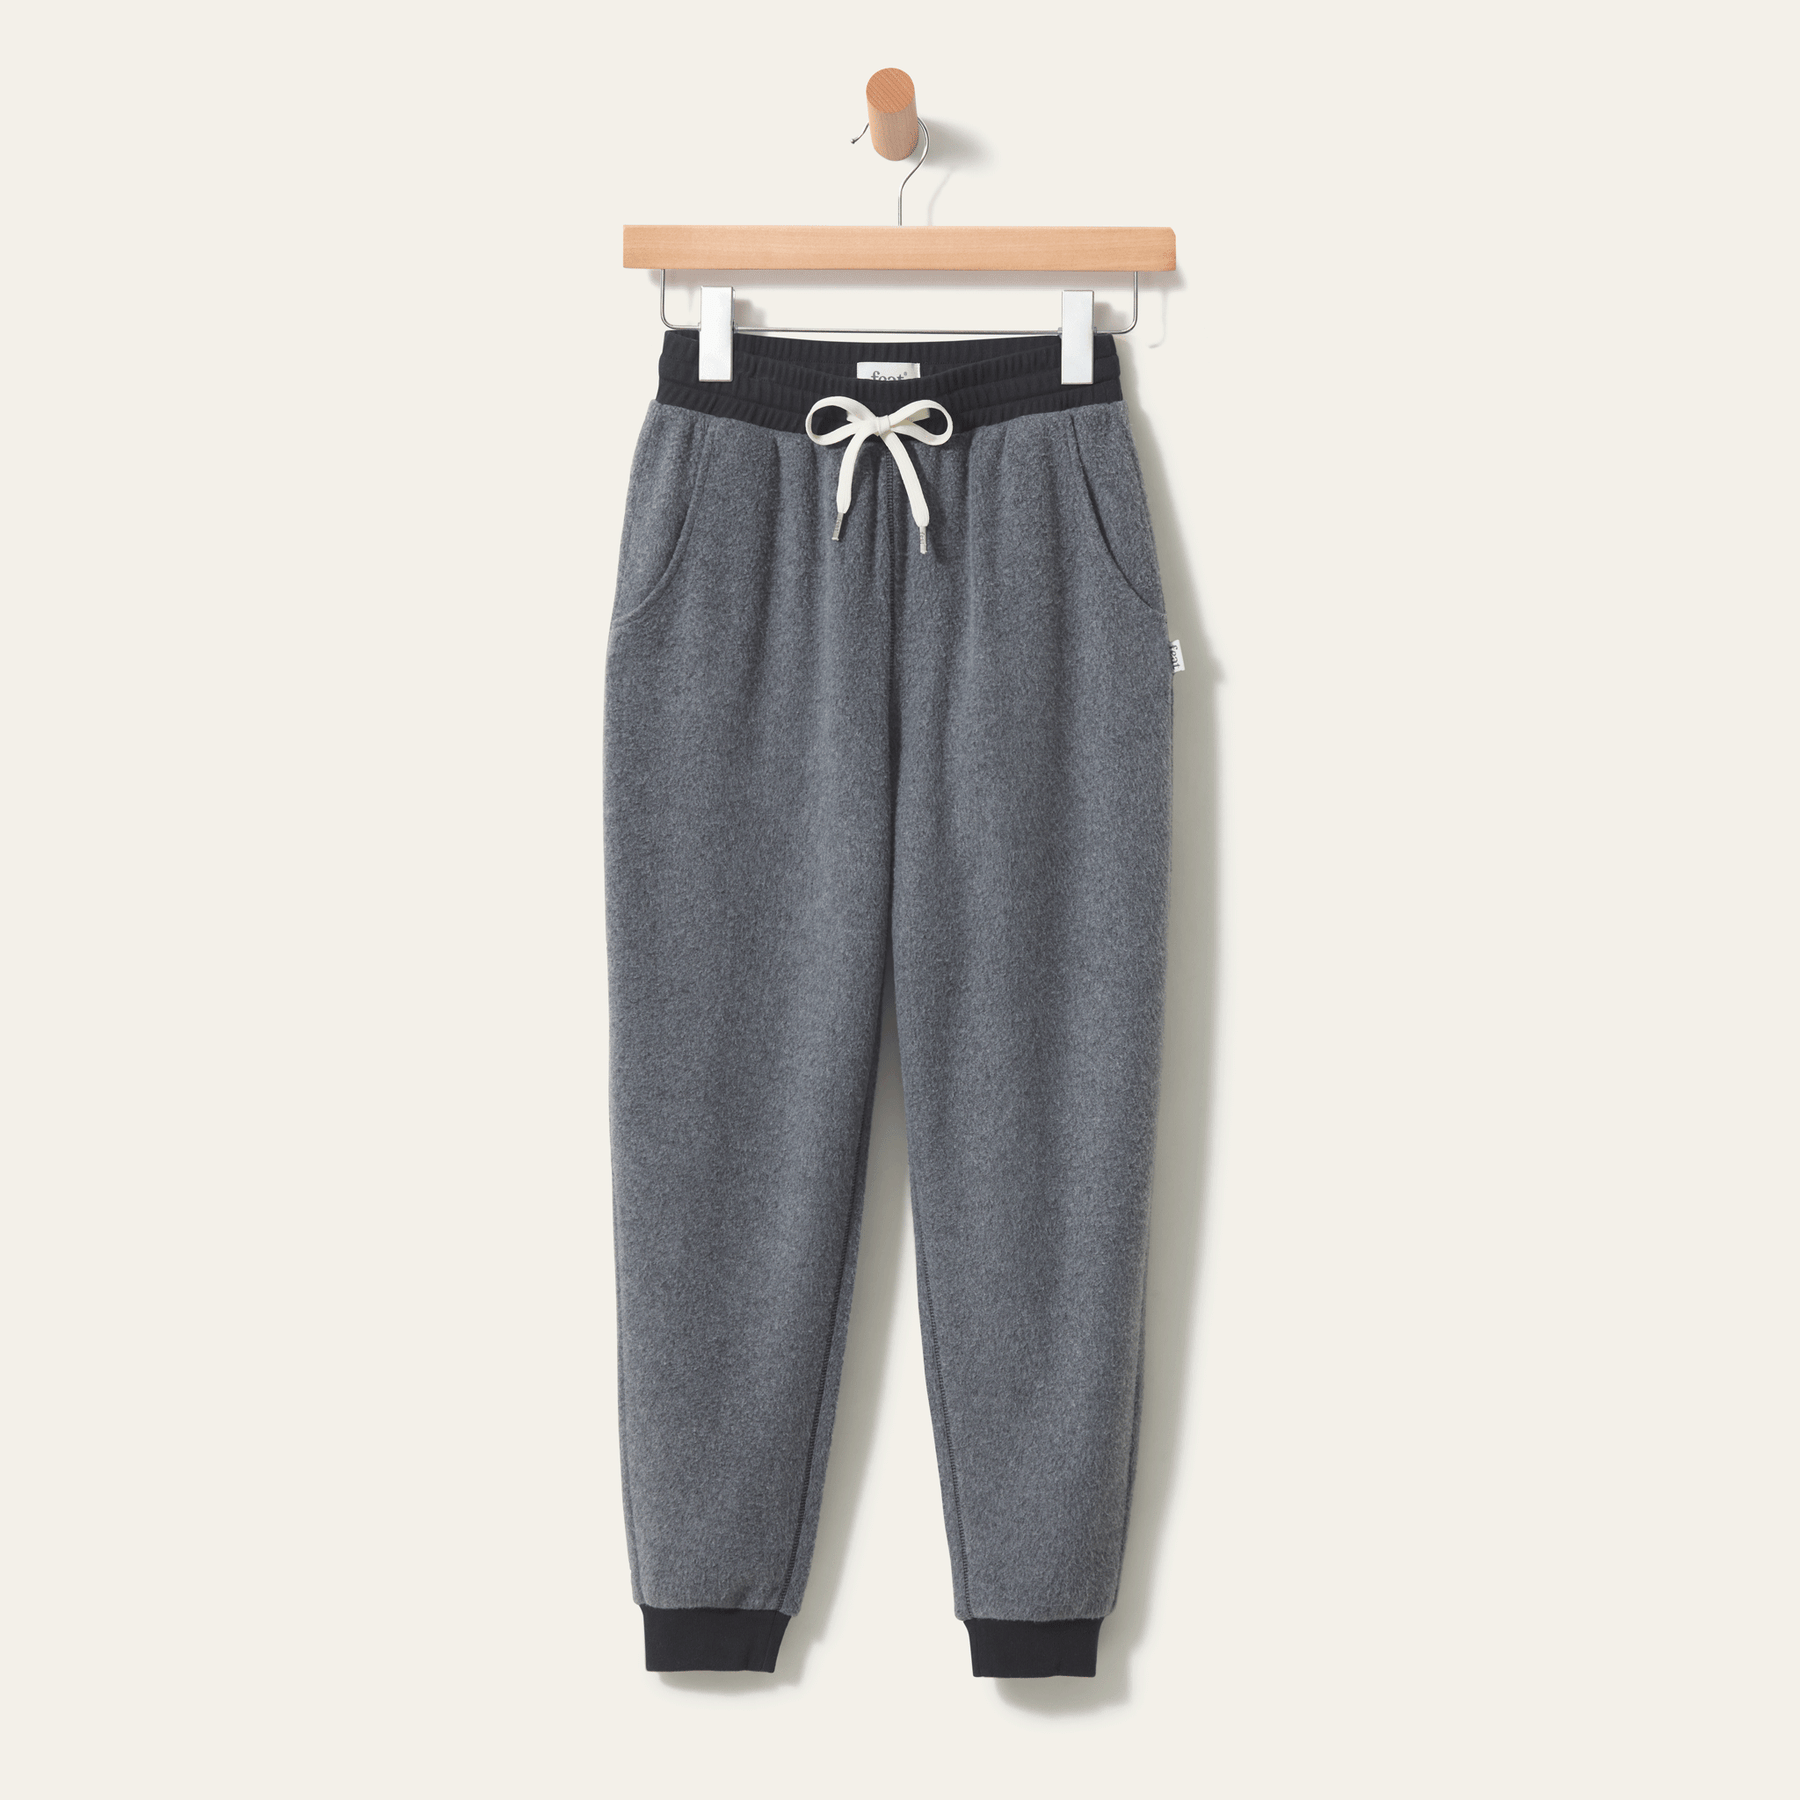 BlanketBlend Joggers - The Softest Joggers Ever. - For Women